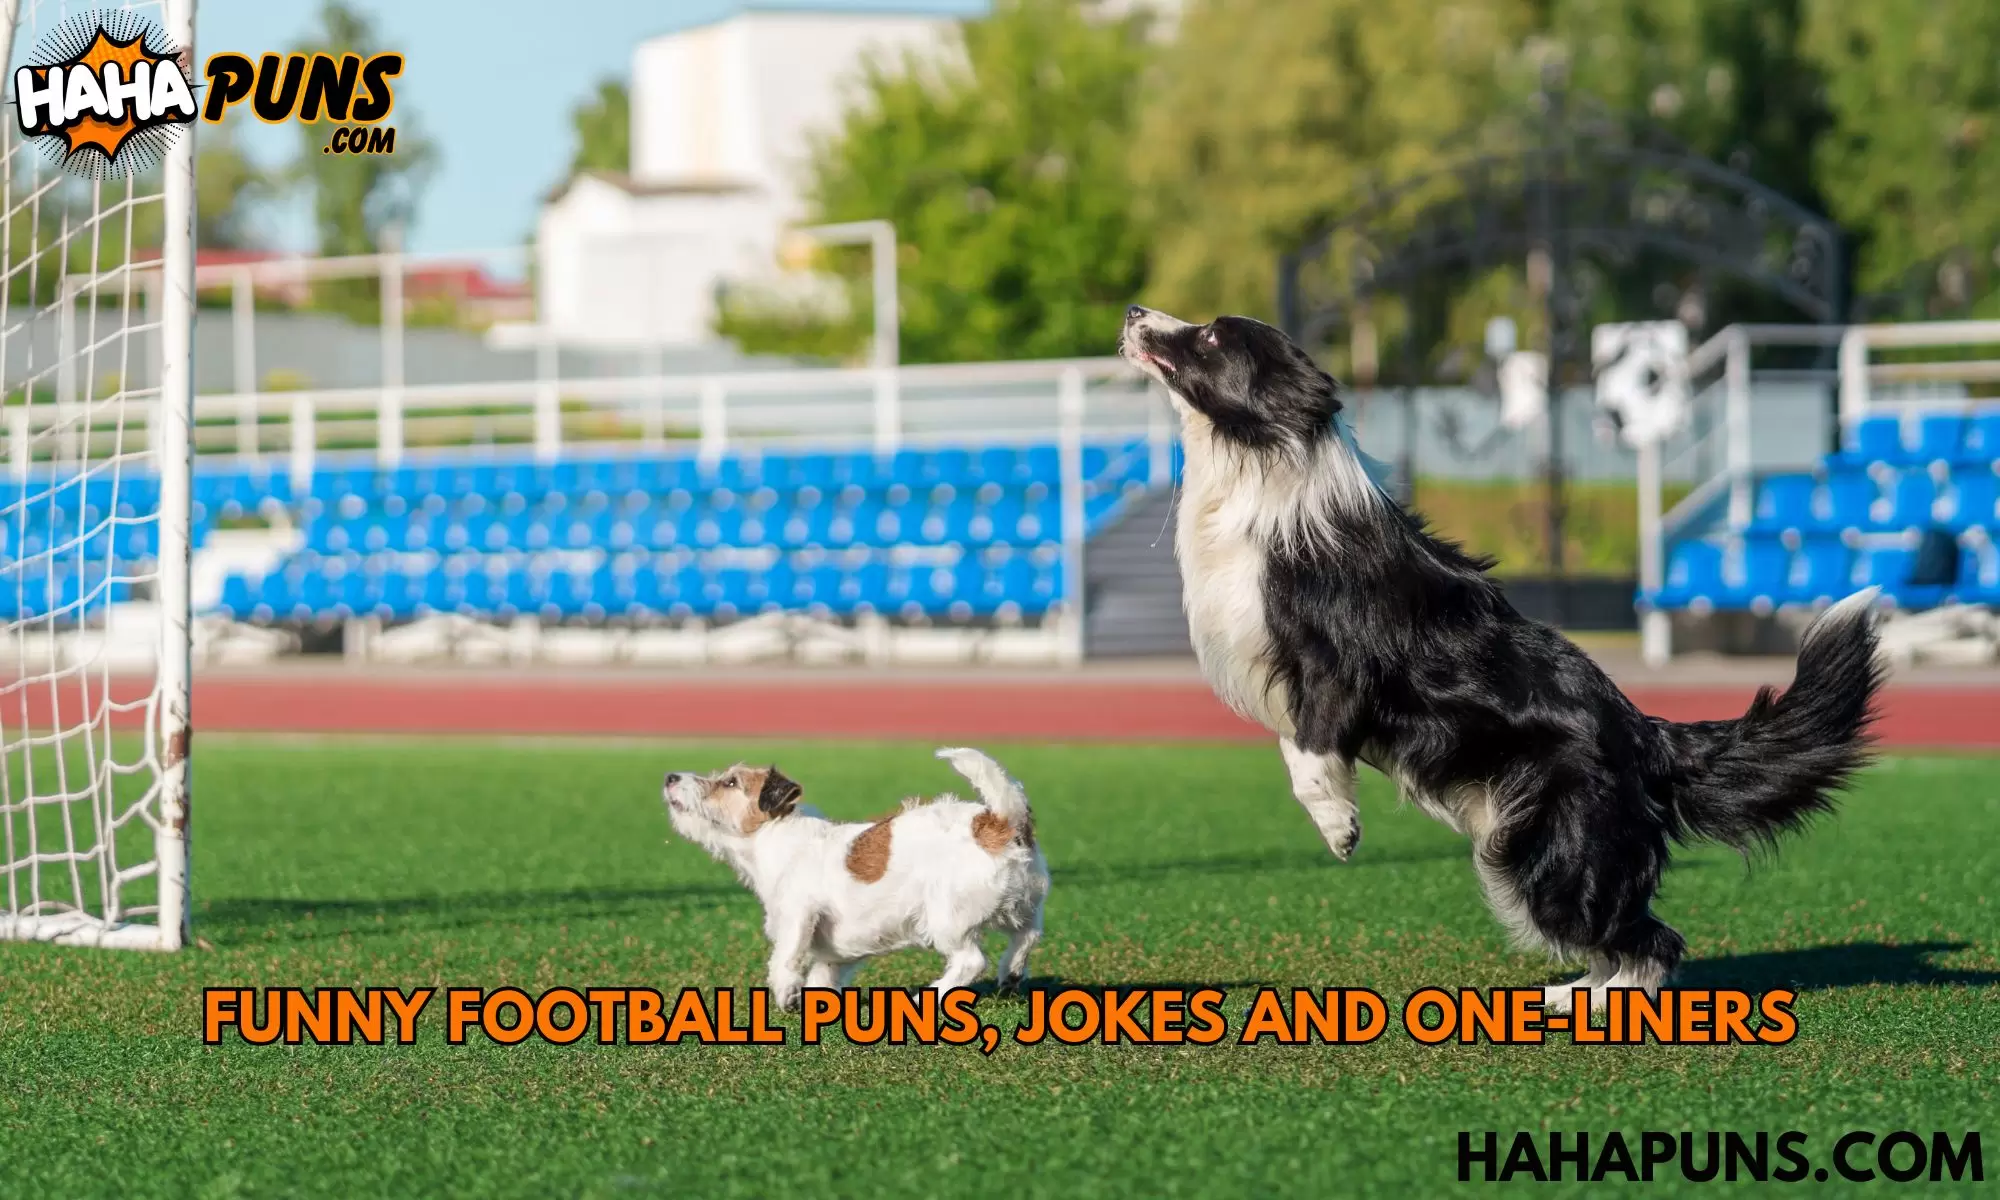 Funny Football Puns, Jokes And One-Liners